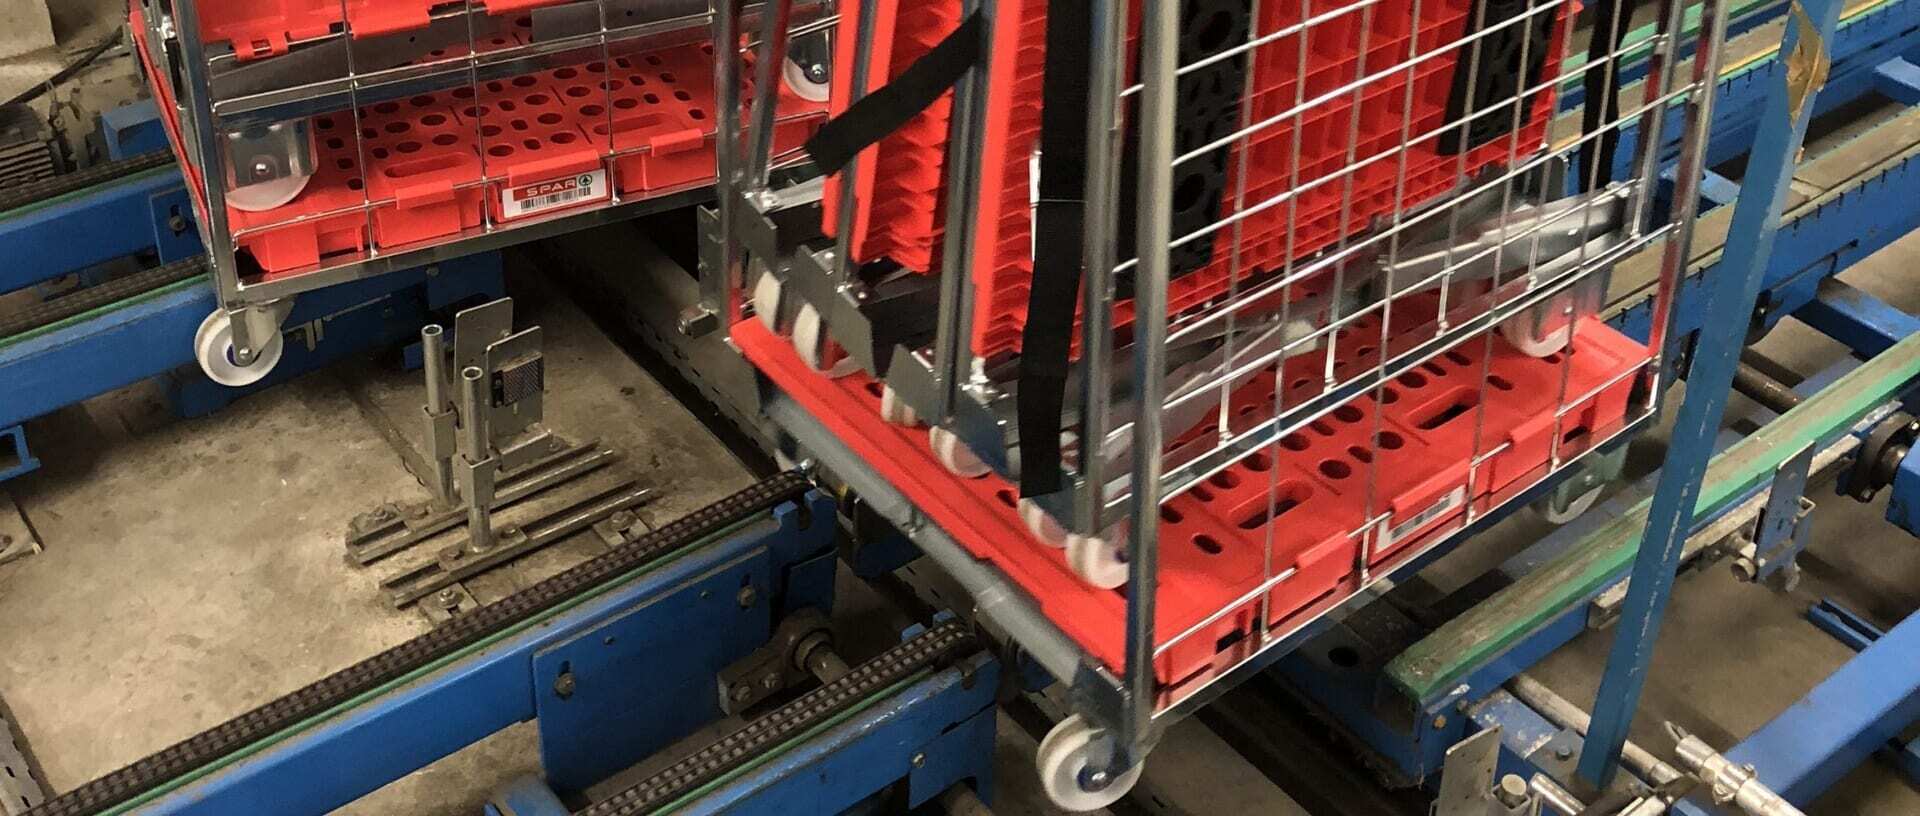 Foldia roll cage in use at SPAR